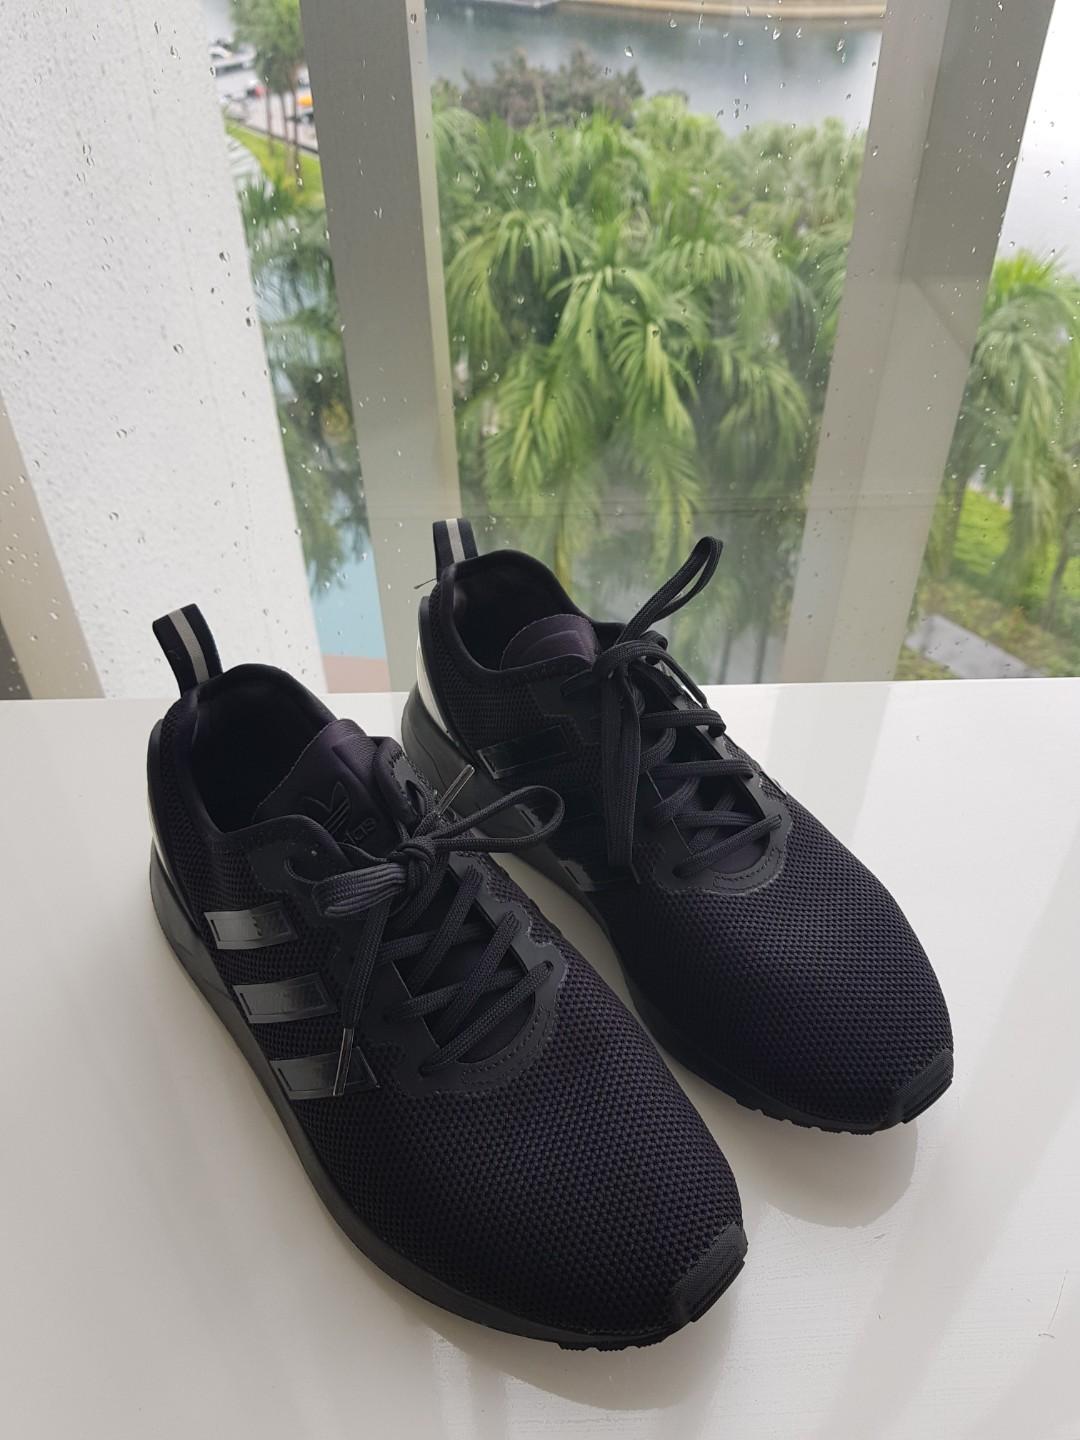 adidas running shoes without laces